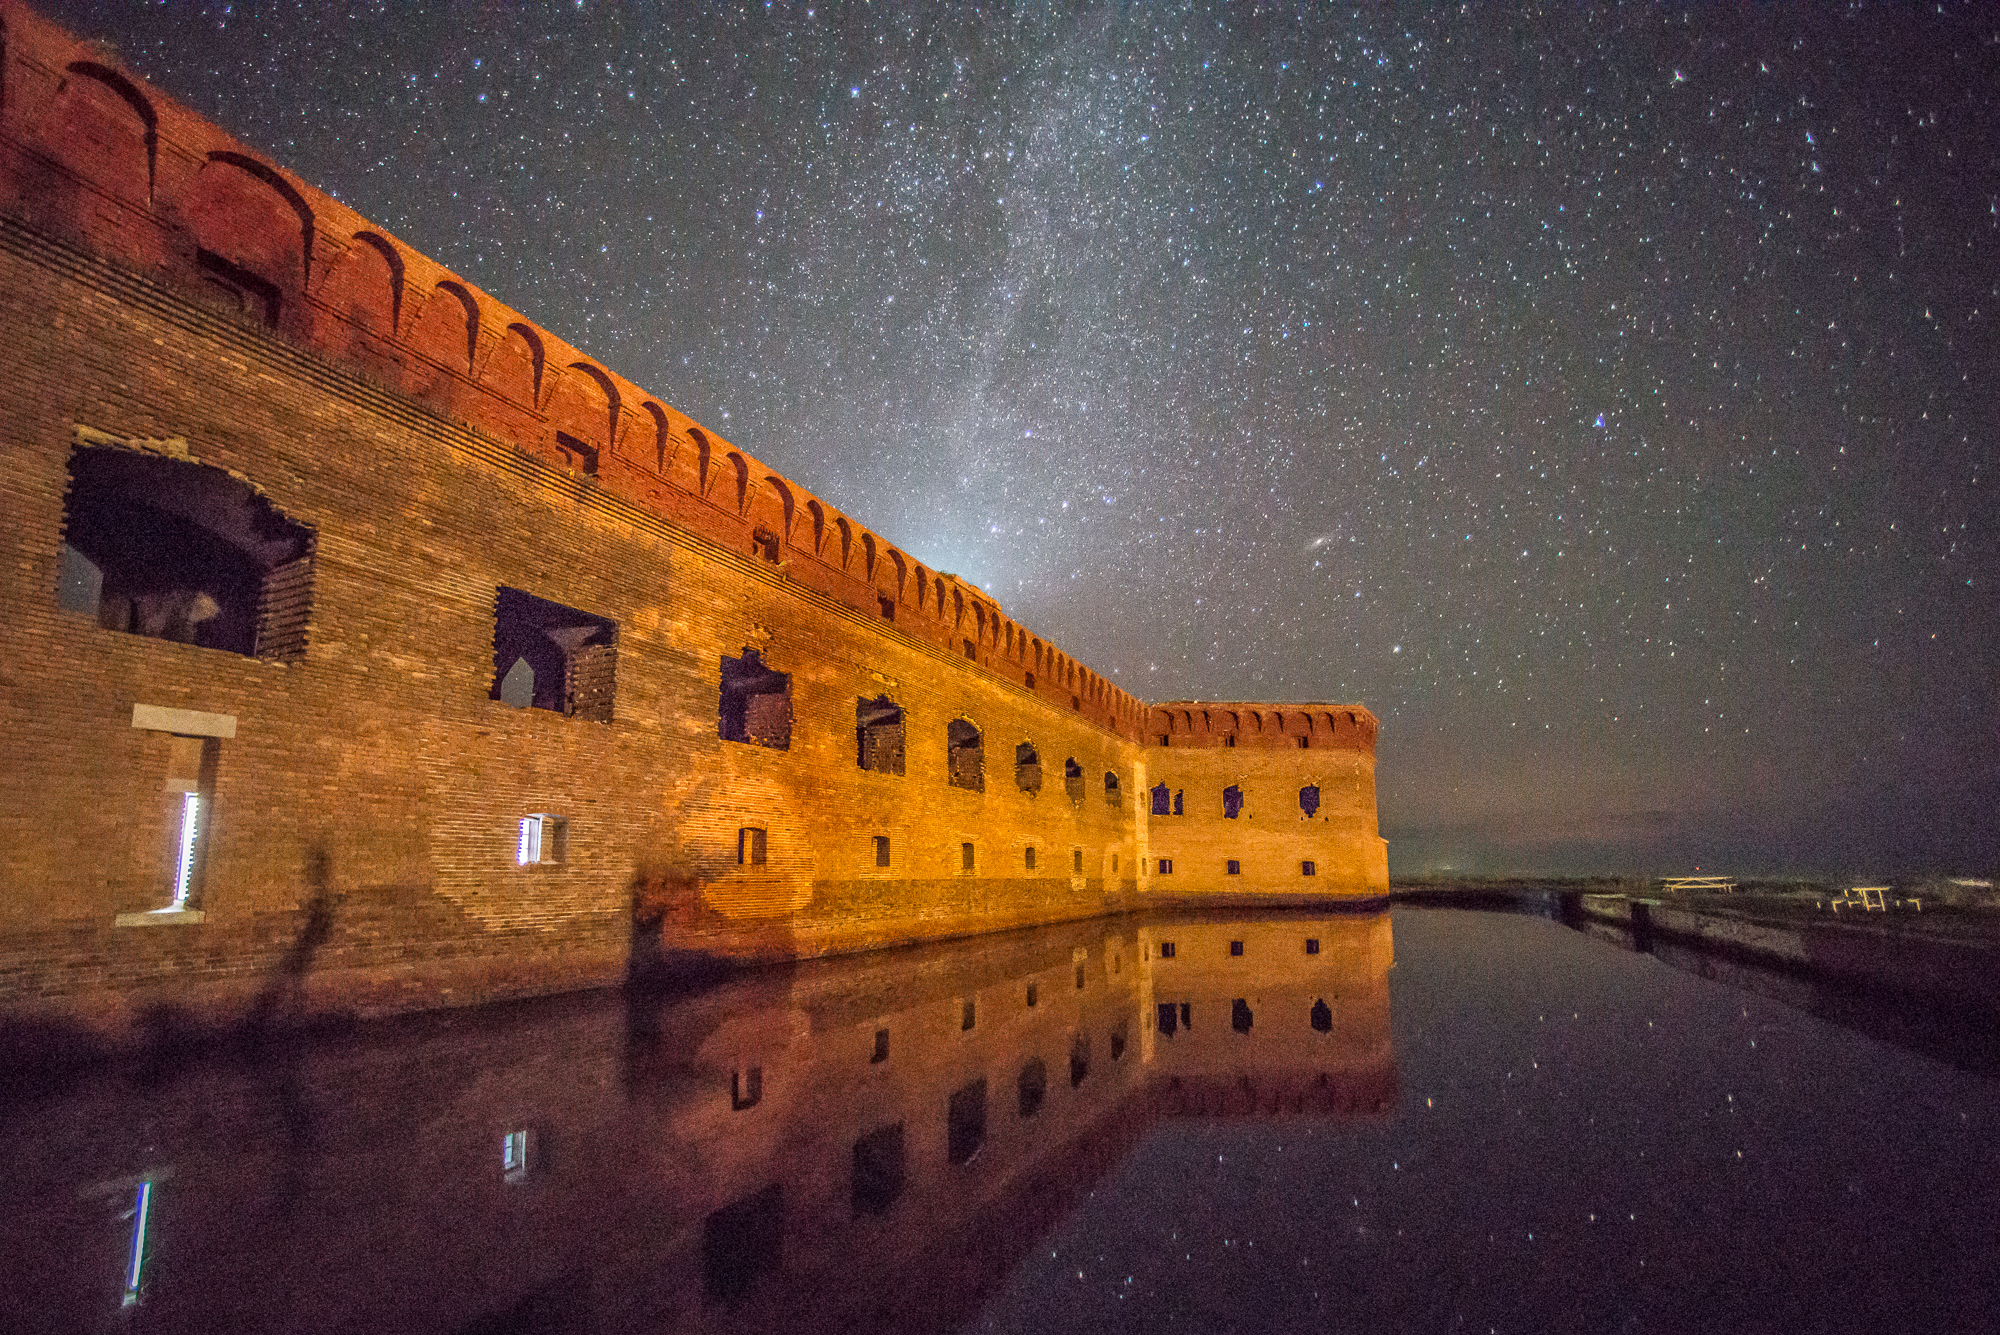 A few of the stars at night with a view of Fort Jefferson.